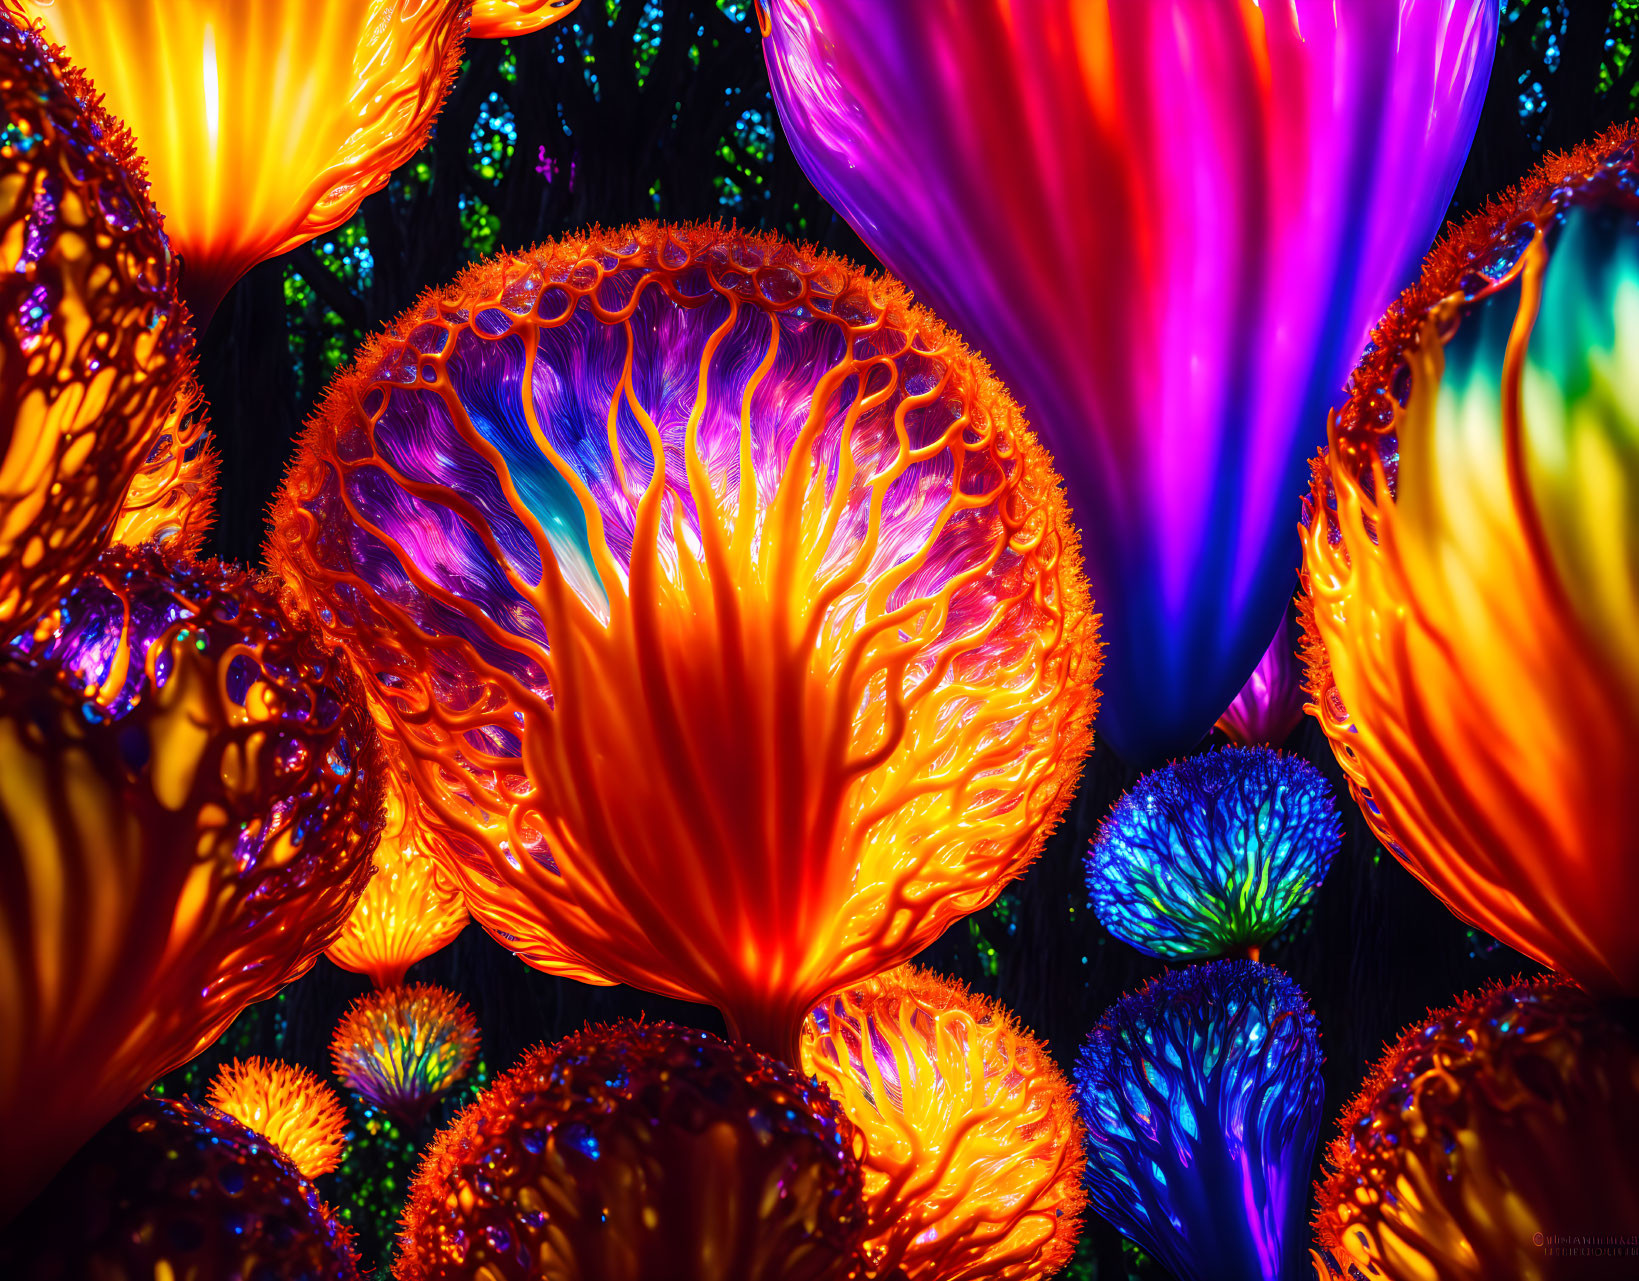 Chihuly forest